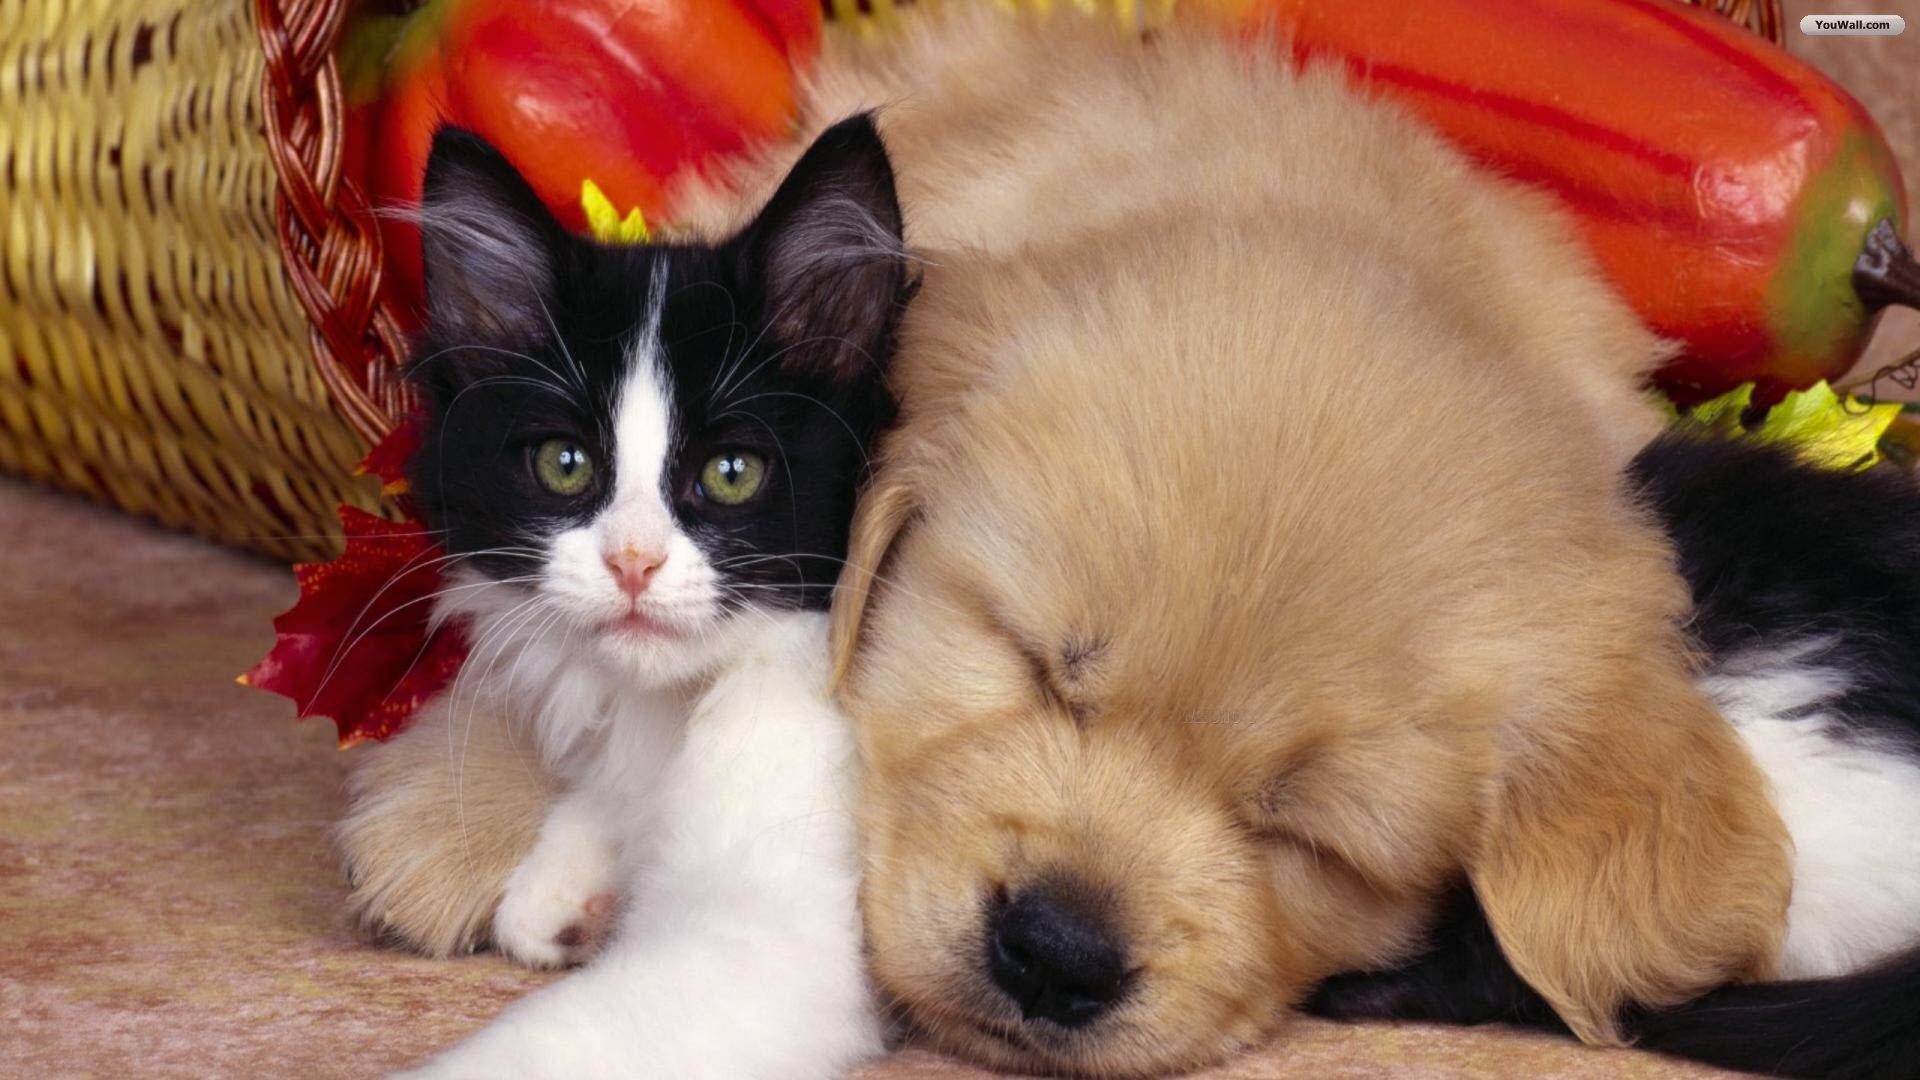 Cute Dog and Cat Wallpaper | Wallpapers, Backgrounds, Images, Art ...